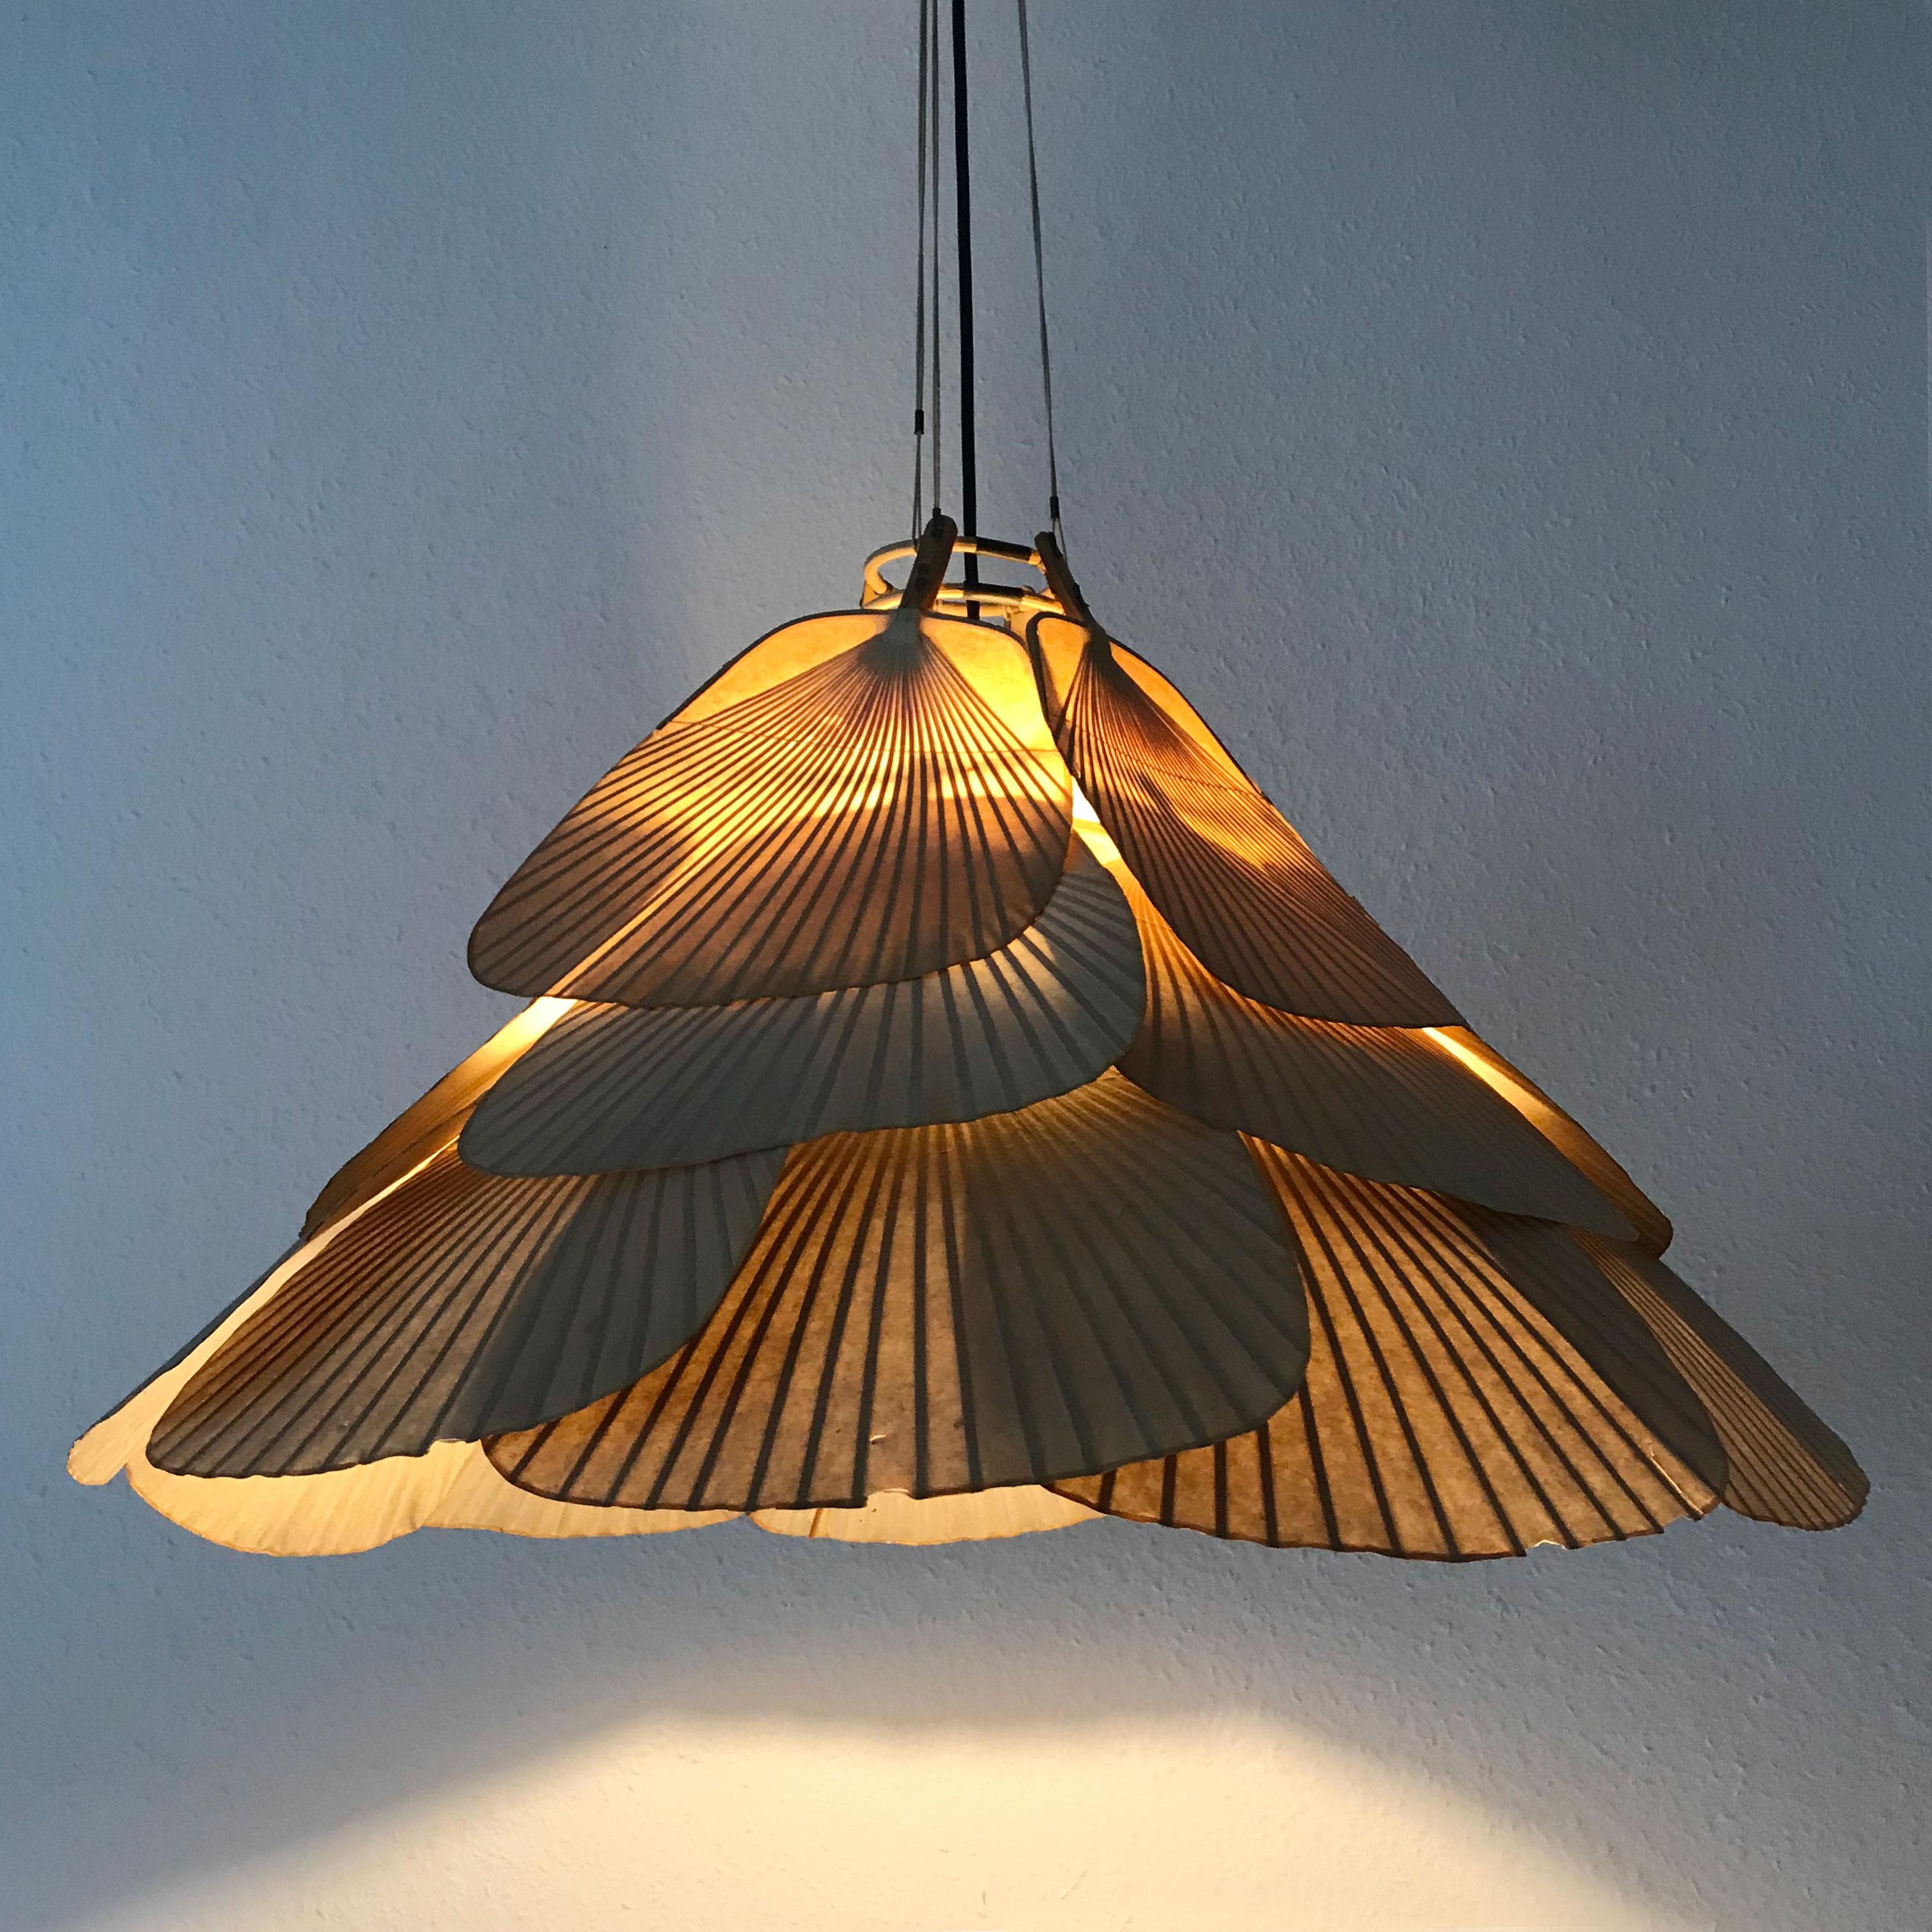 Exceptional, three-tiered Mid-Century Modern 'Uchiwa' bamboo fan chandelier or pendant lamp by Ingo Maurer for Design M, 1970s, Germany.

Executed in bamboo and rice paper. It needs 1 x E27 Edison screw fit bulbs. Delivery without bulbs. It runs